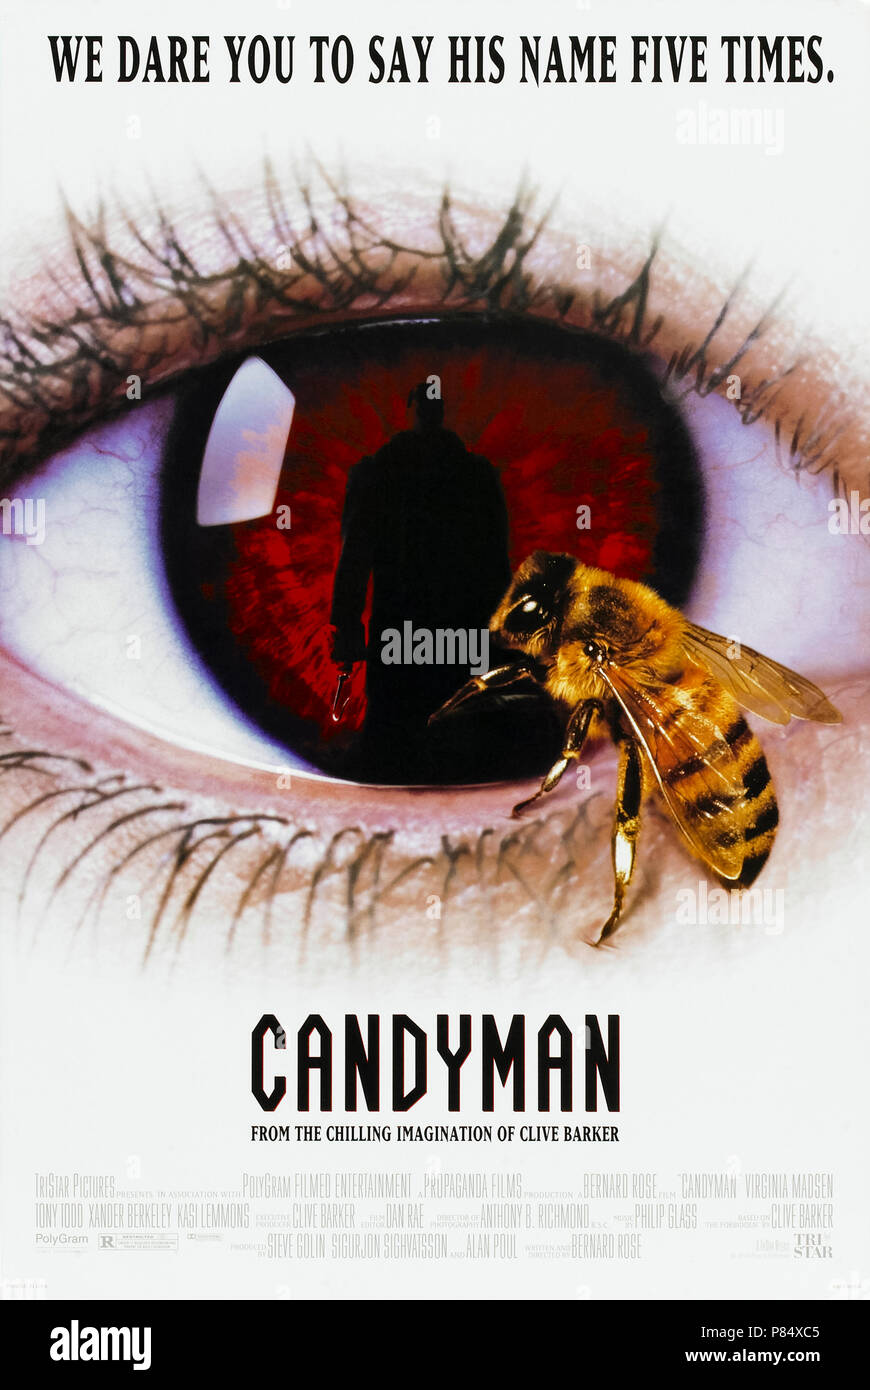 Candyman (1992) directed by Bernard Rose and starring Virginia Madsen, Xander Berkeley and Tony Todd. A student investigating urban legends discovers its prudent not to say Candyman 5 times whilst looking in the mirror. Stock Photo